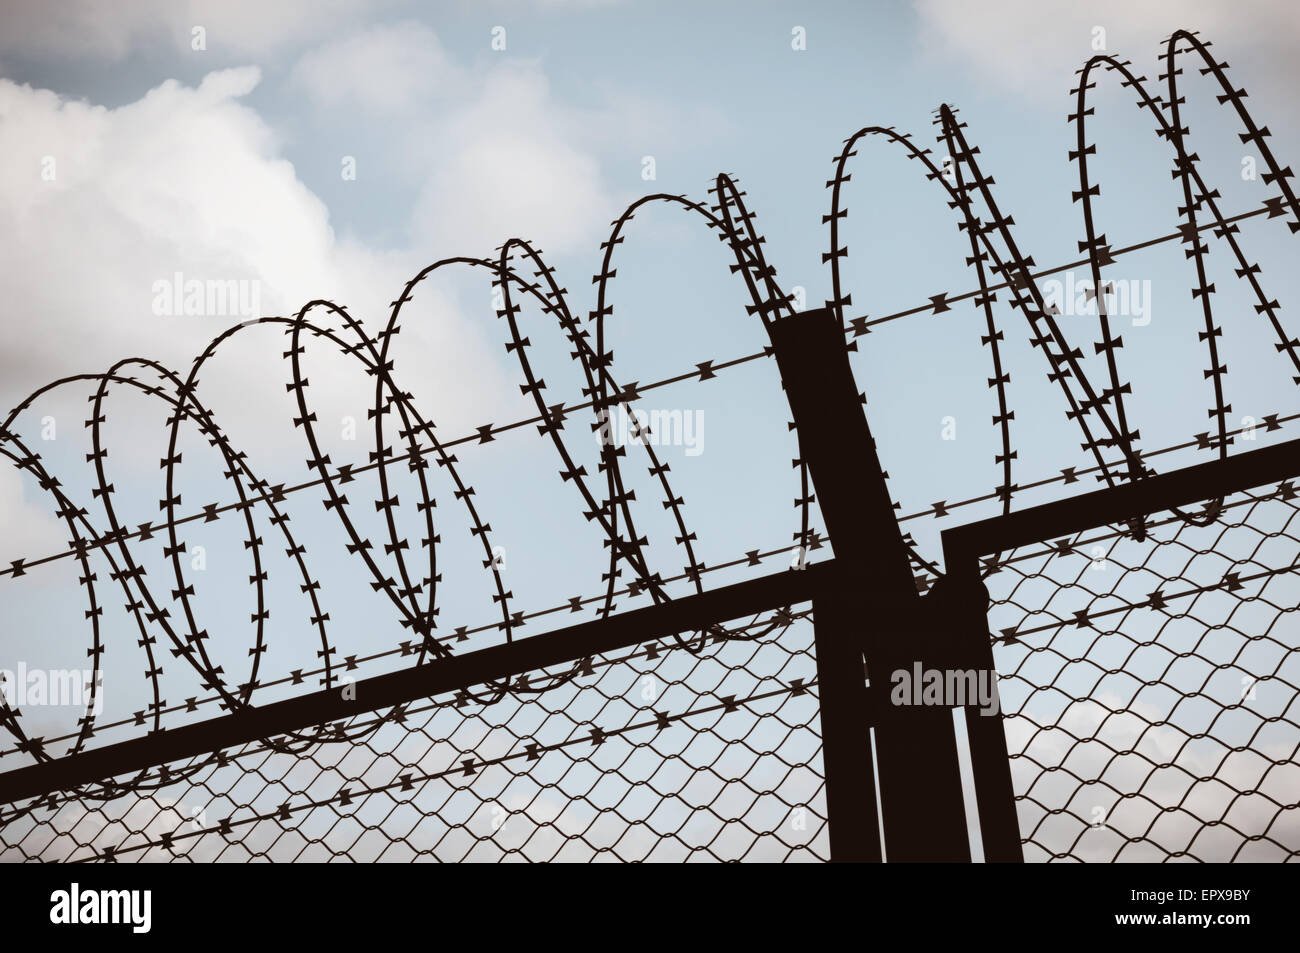 Fence with a barbed wire, silhouette on blue sky Stock Photo